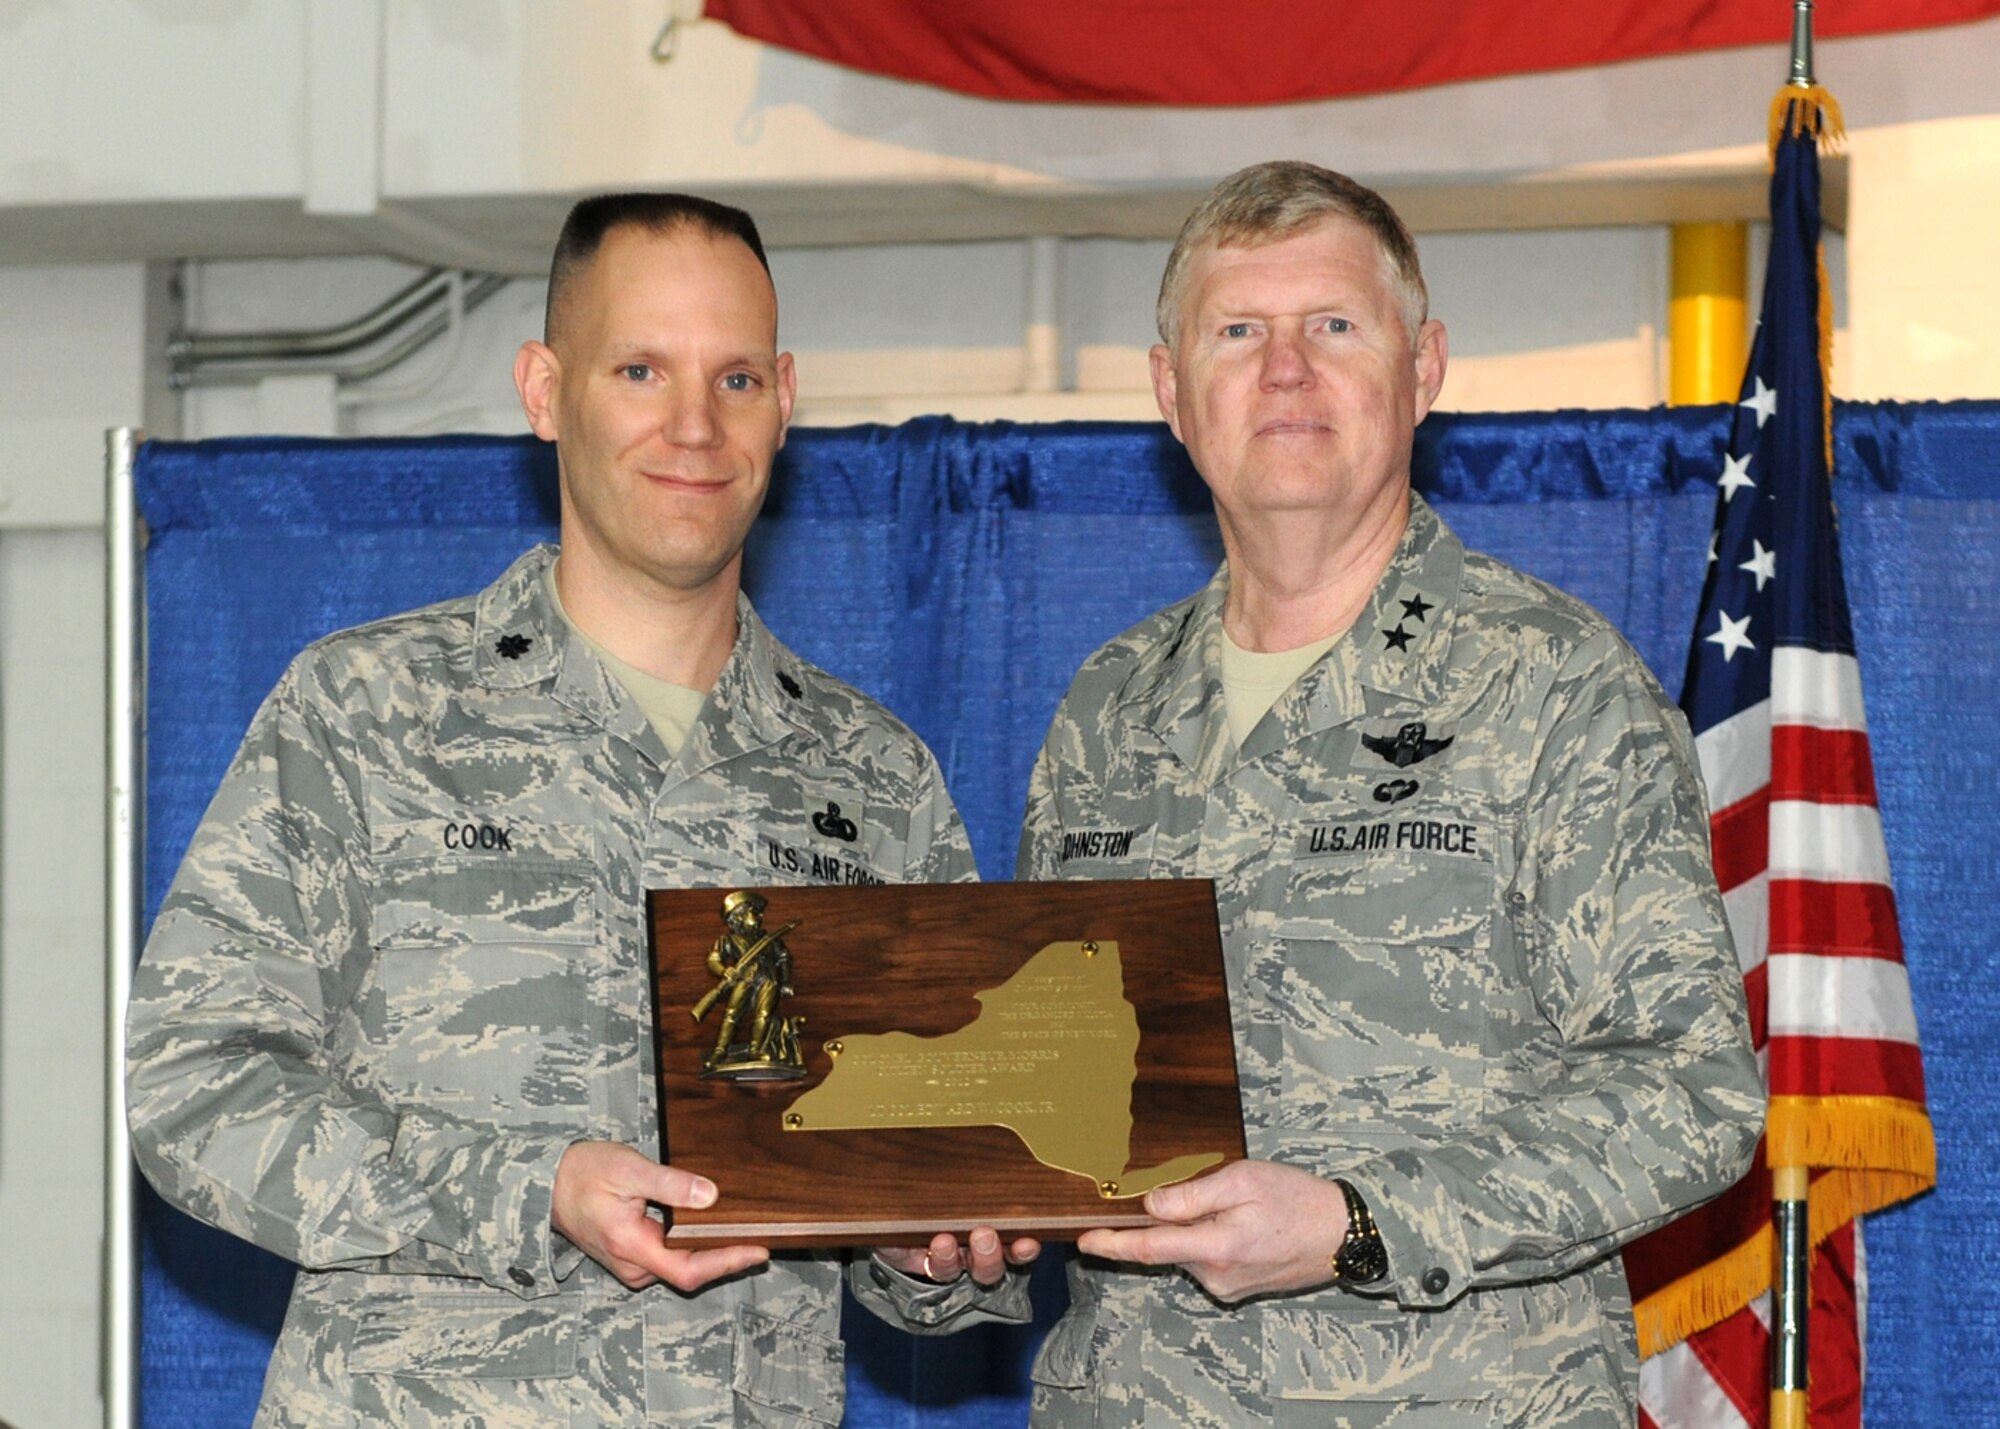 New York Air National Guard Commander Maj. Gen. Verle L. Johnston (right) presents Lt. Col. Edward W. Cook, 174th Attack Wing Logistics Readiness Squadron Commander, with the Colonel Governour Morris Citizen Soldier Award at Hancock Field, Syracuse NY on 3 March 2013. The award is presented annually to a member of the New York State Organized Militia who has distinguished himself through outstanding support to the New York National Guard and his local community. (NYANG photo by Tech. Sgt. Justin Huett/Released)